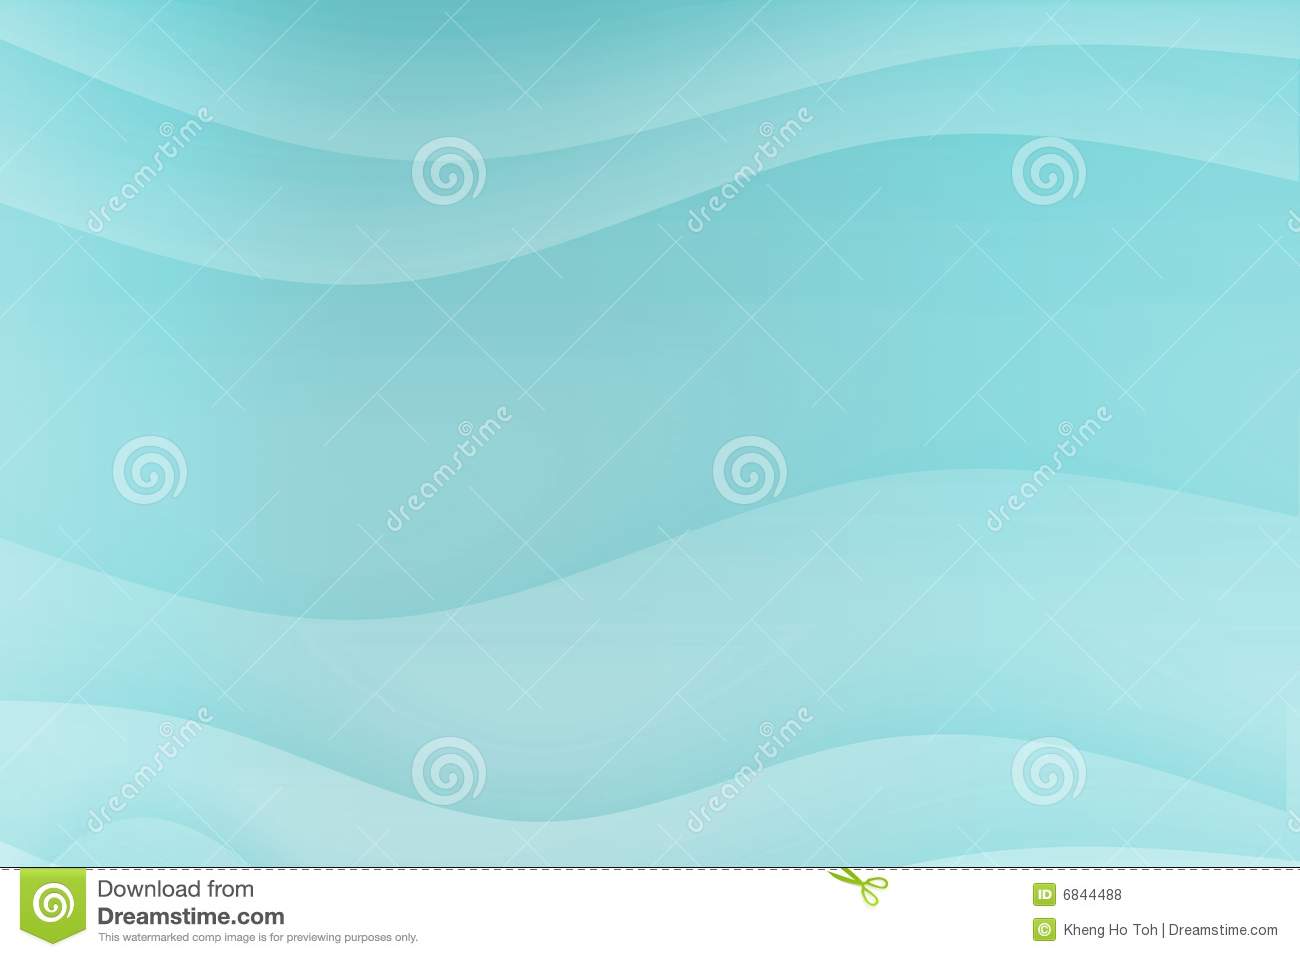 Blue Soothing Calming Curves Royalty Free Stock Photos   Image